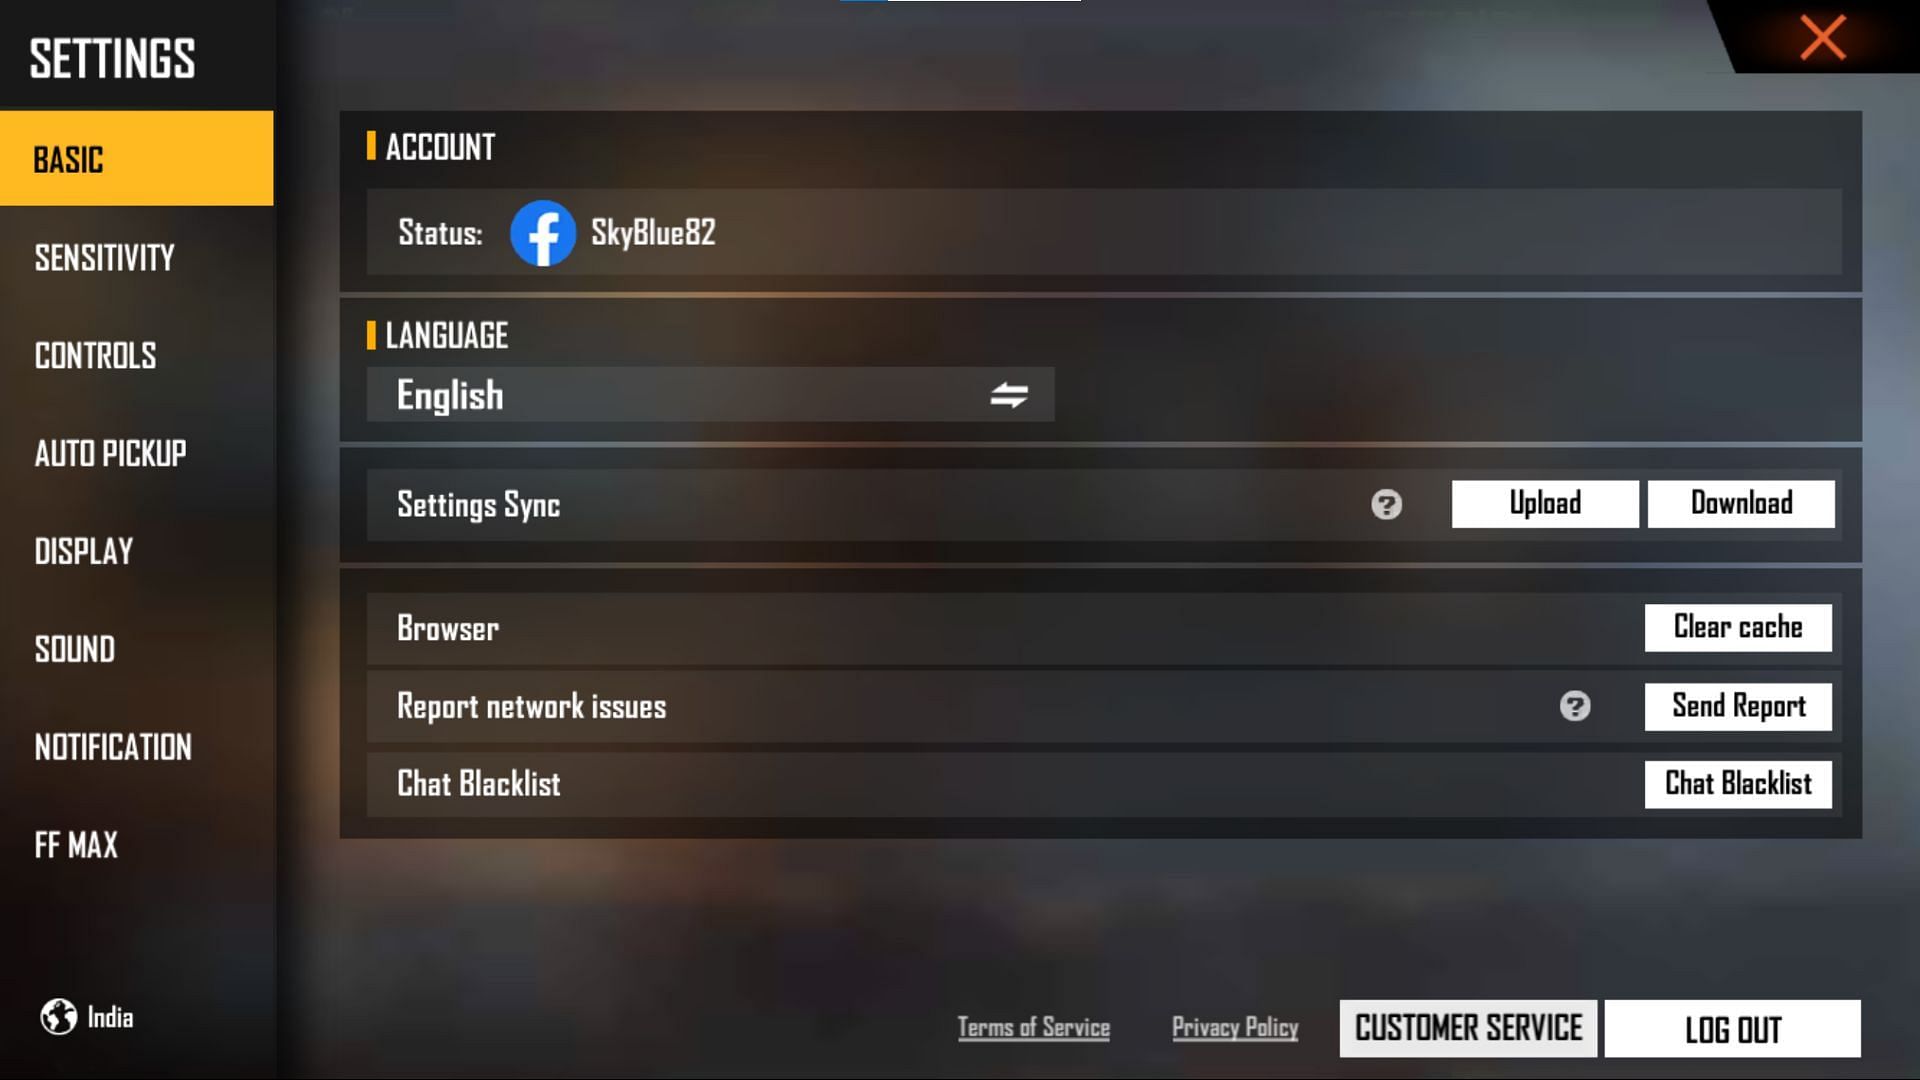 Players should head over to the &#039;Sensitivity&#039; section and change the required ones (Image via Garena)